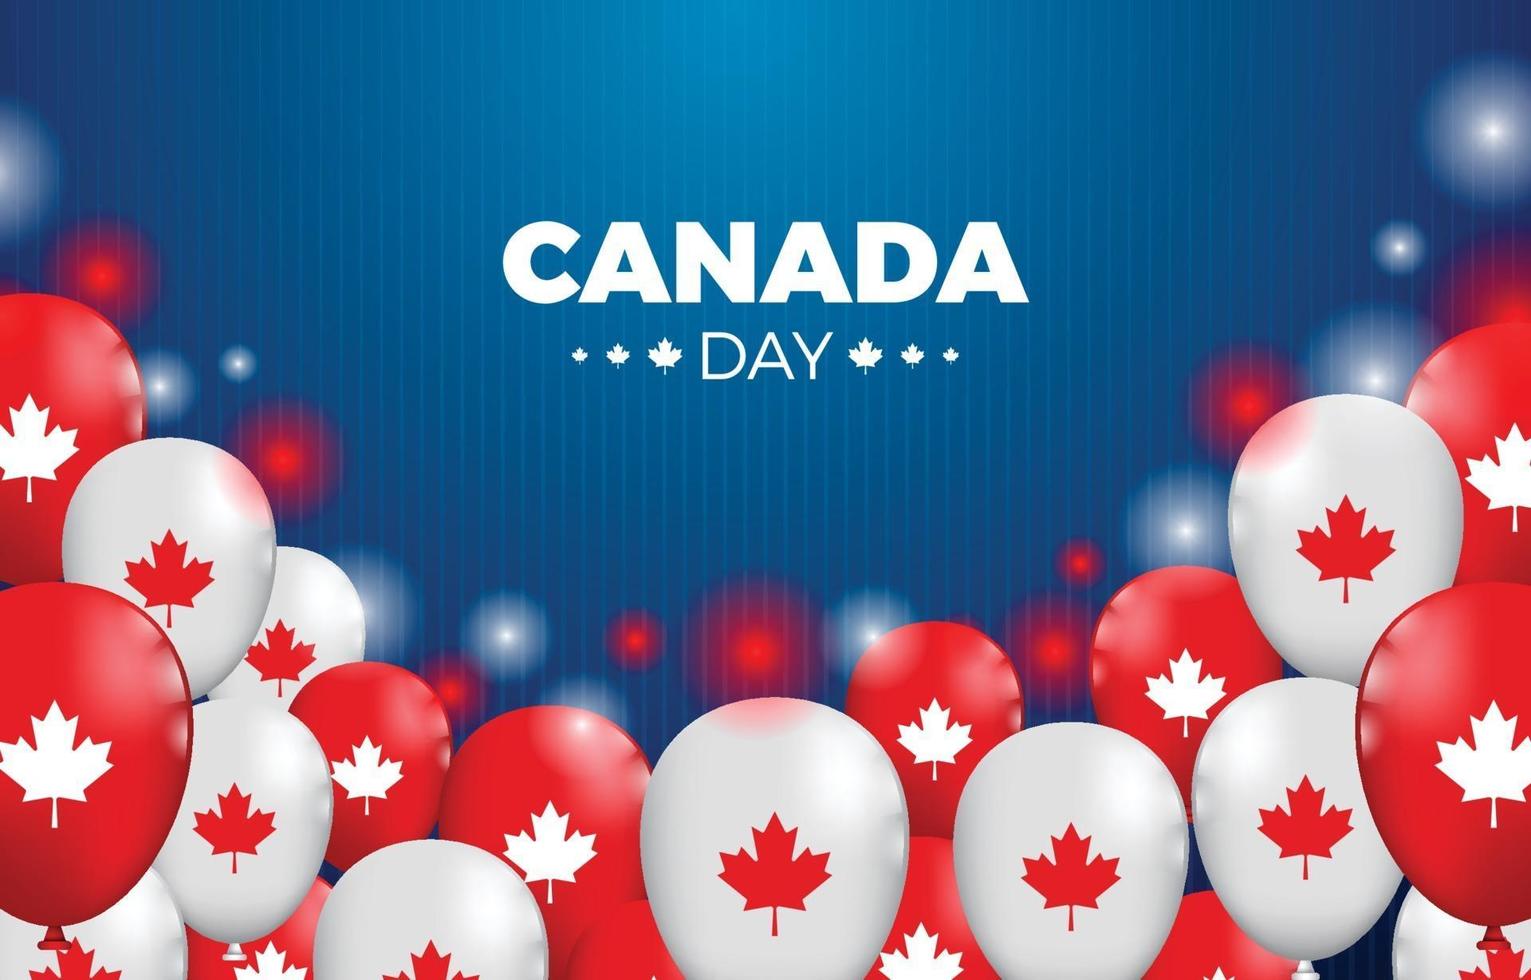 Canada Day with Ballons and Sparkling Illustration vector